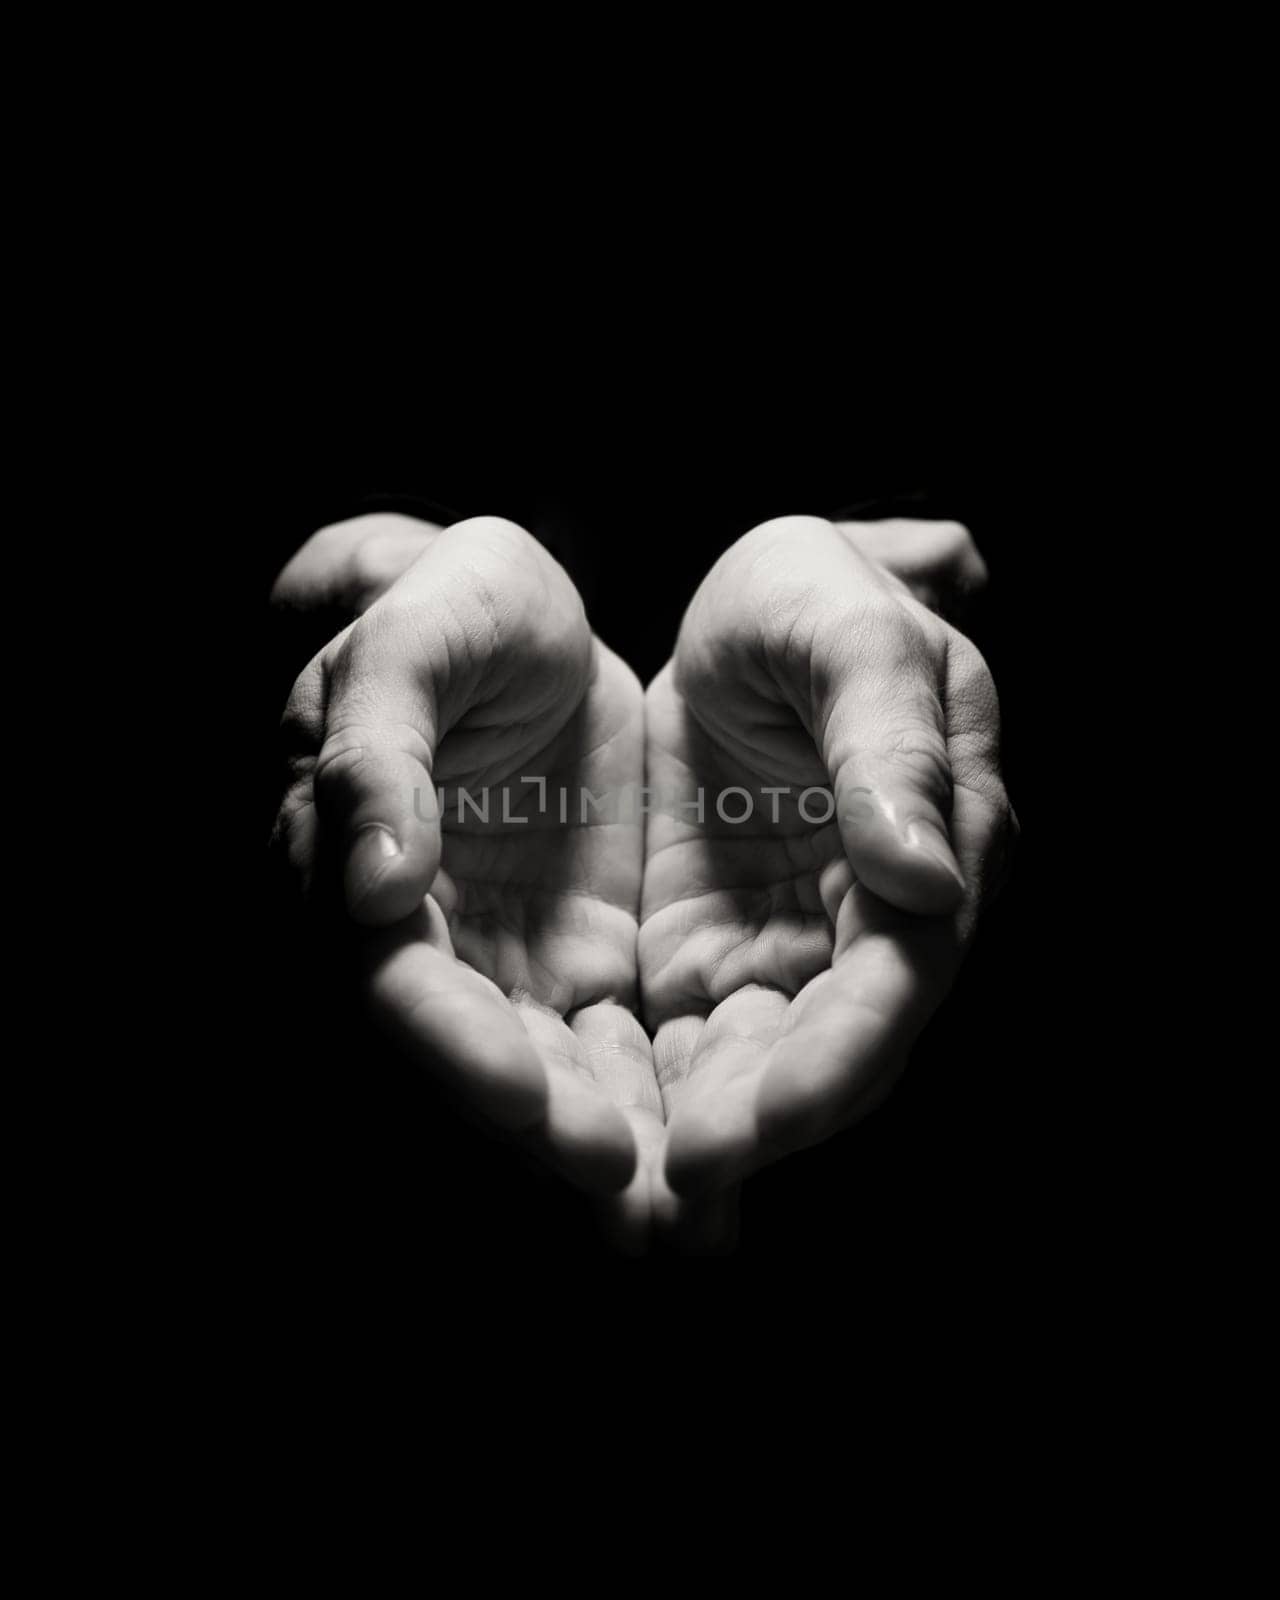 Two hands open facing up in a dark background, implying an offering or gesture